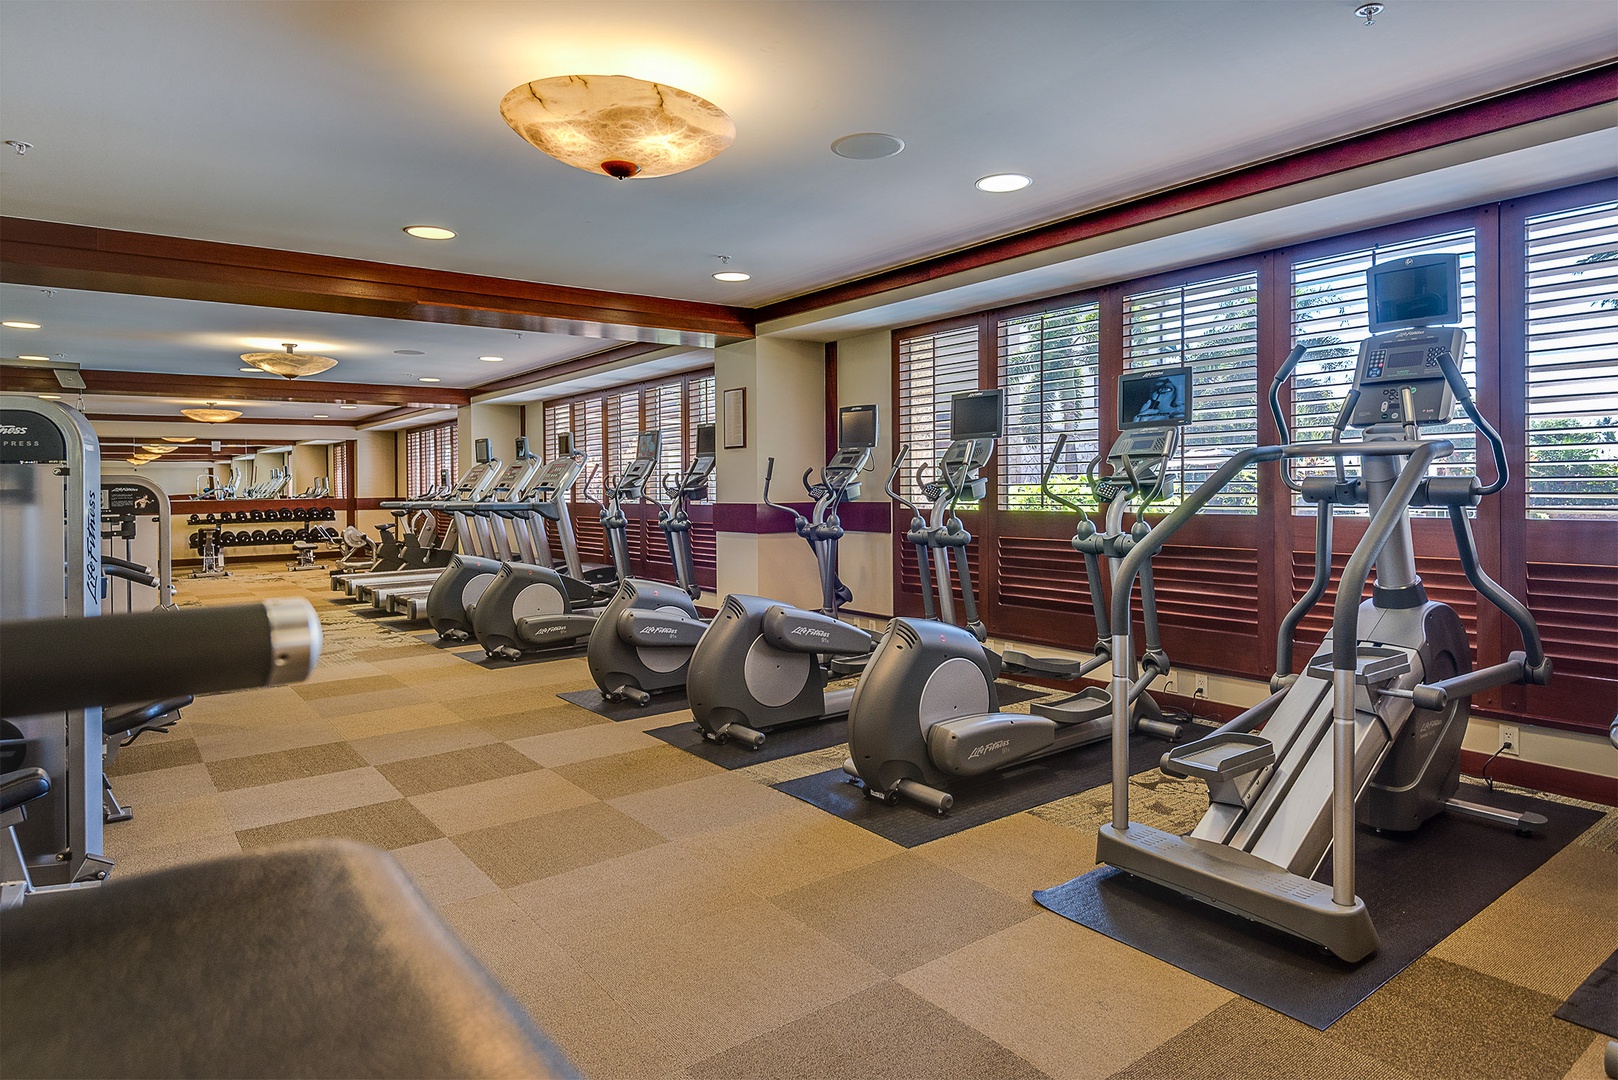 Kapolei Vacation Rentals, Ko Olina Beach Villas B506 - A state of the art gym for your renewal and self care.